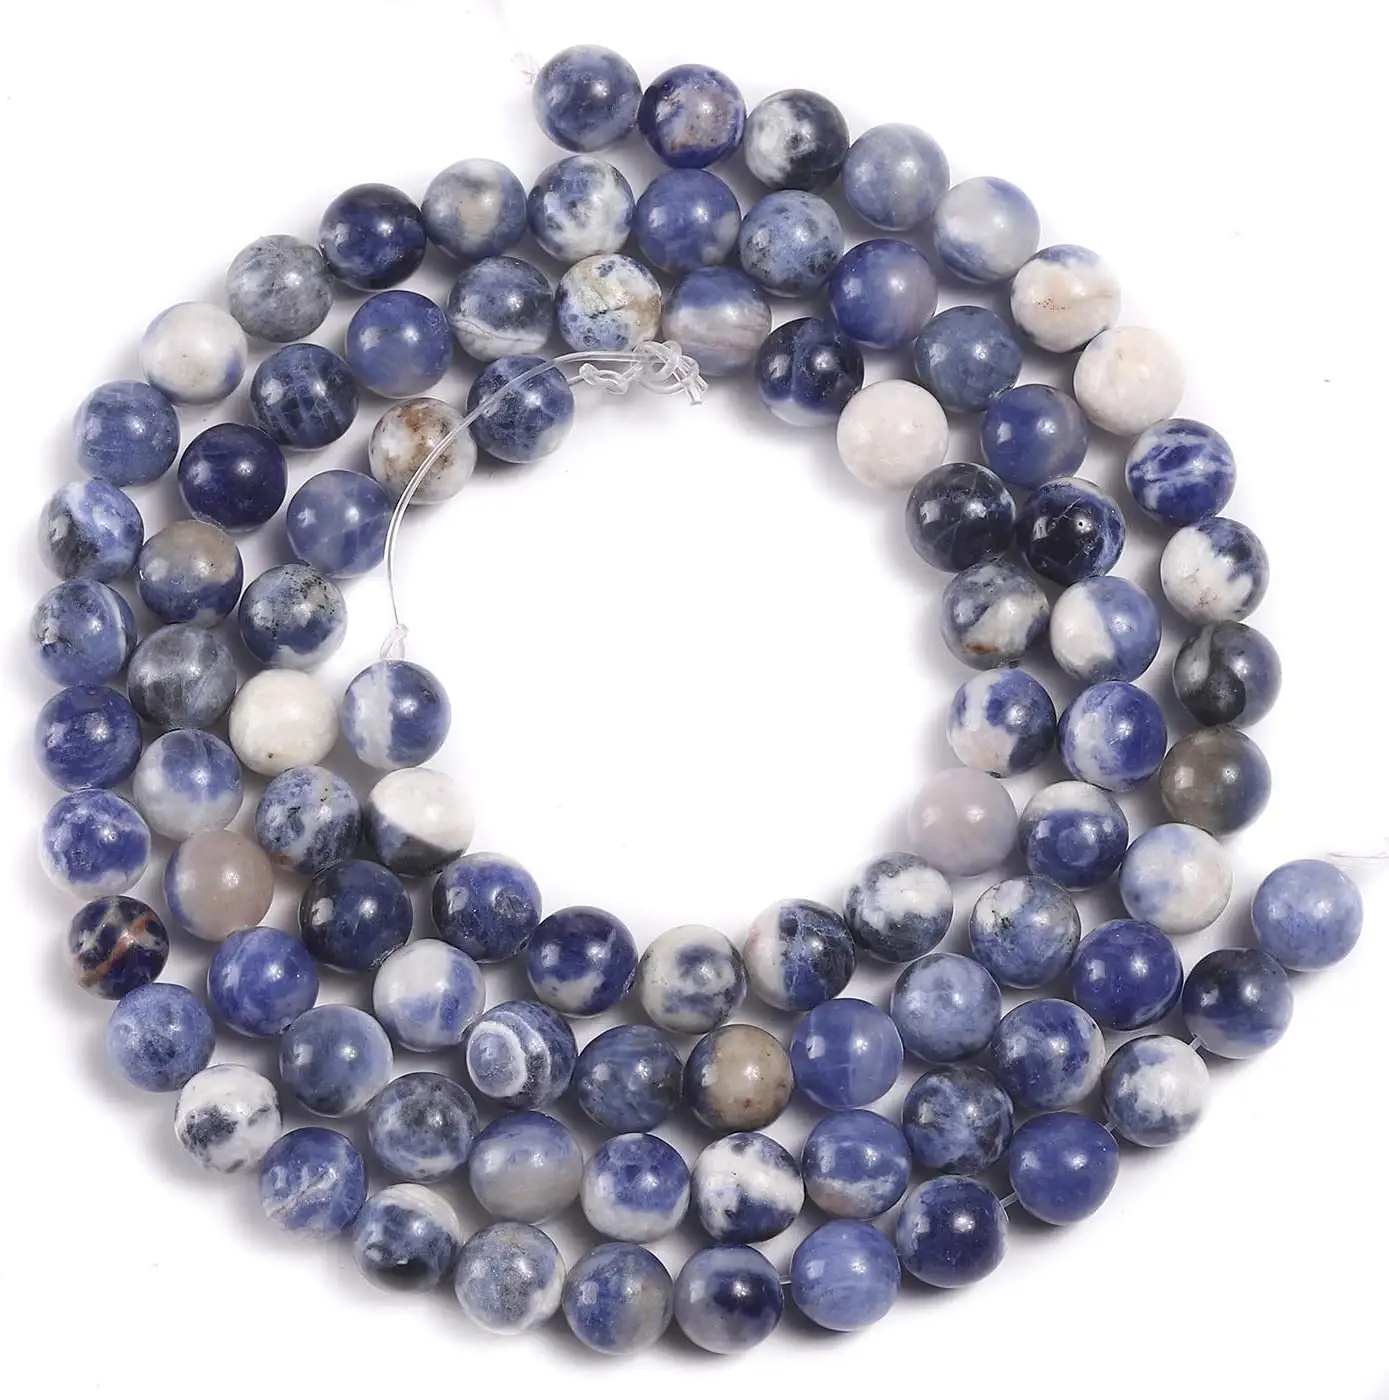 Wholesale Smooth White Sodalite for Making Charm Jewelry Crafts Natural White Sodalite Loose Gemstone Beads